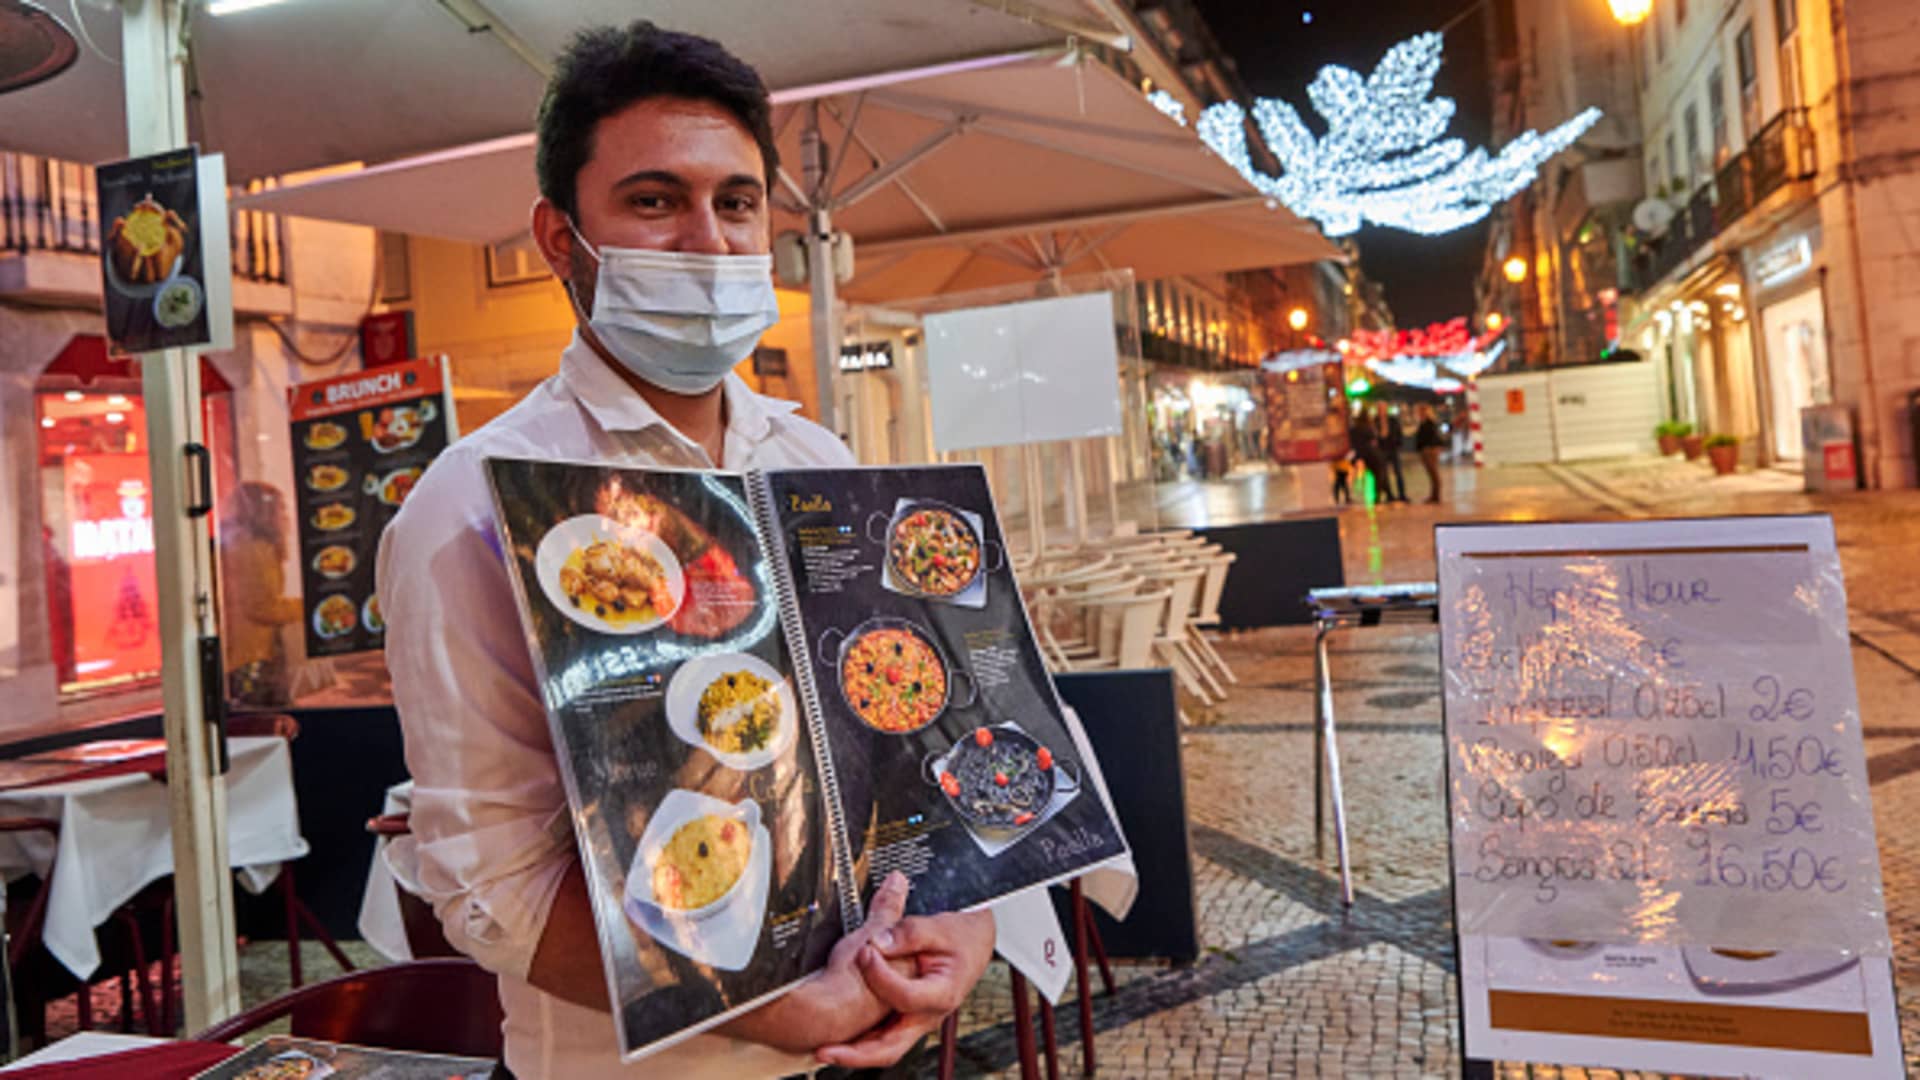 LISBON, PORTUGAL - A waiter wearing a protective mask shows the menu at one of the restaurants in Rua Augusta during the COVID-19 Coronavirus pandemic on November 23, 2020 in Lisbon, Portugal.